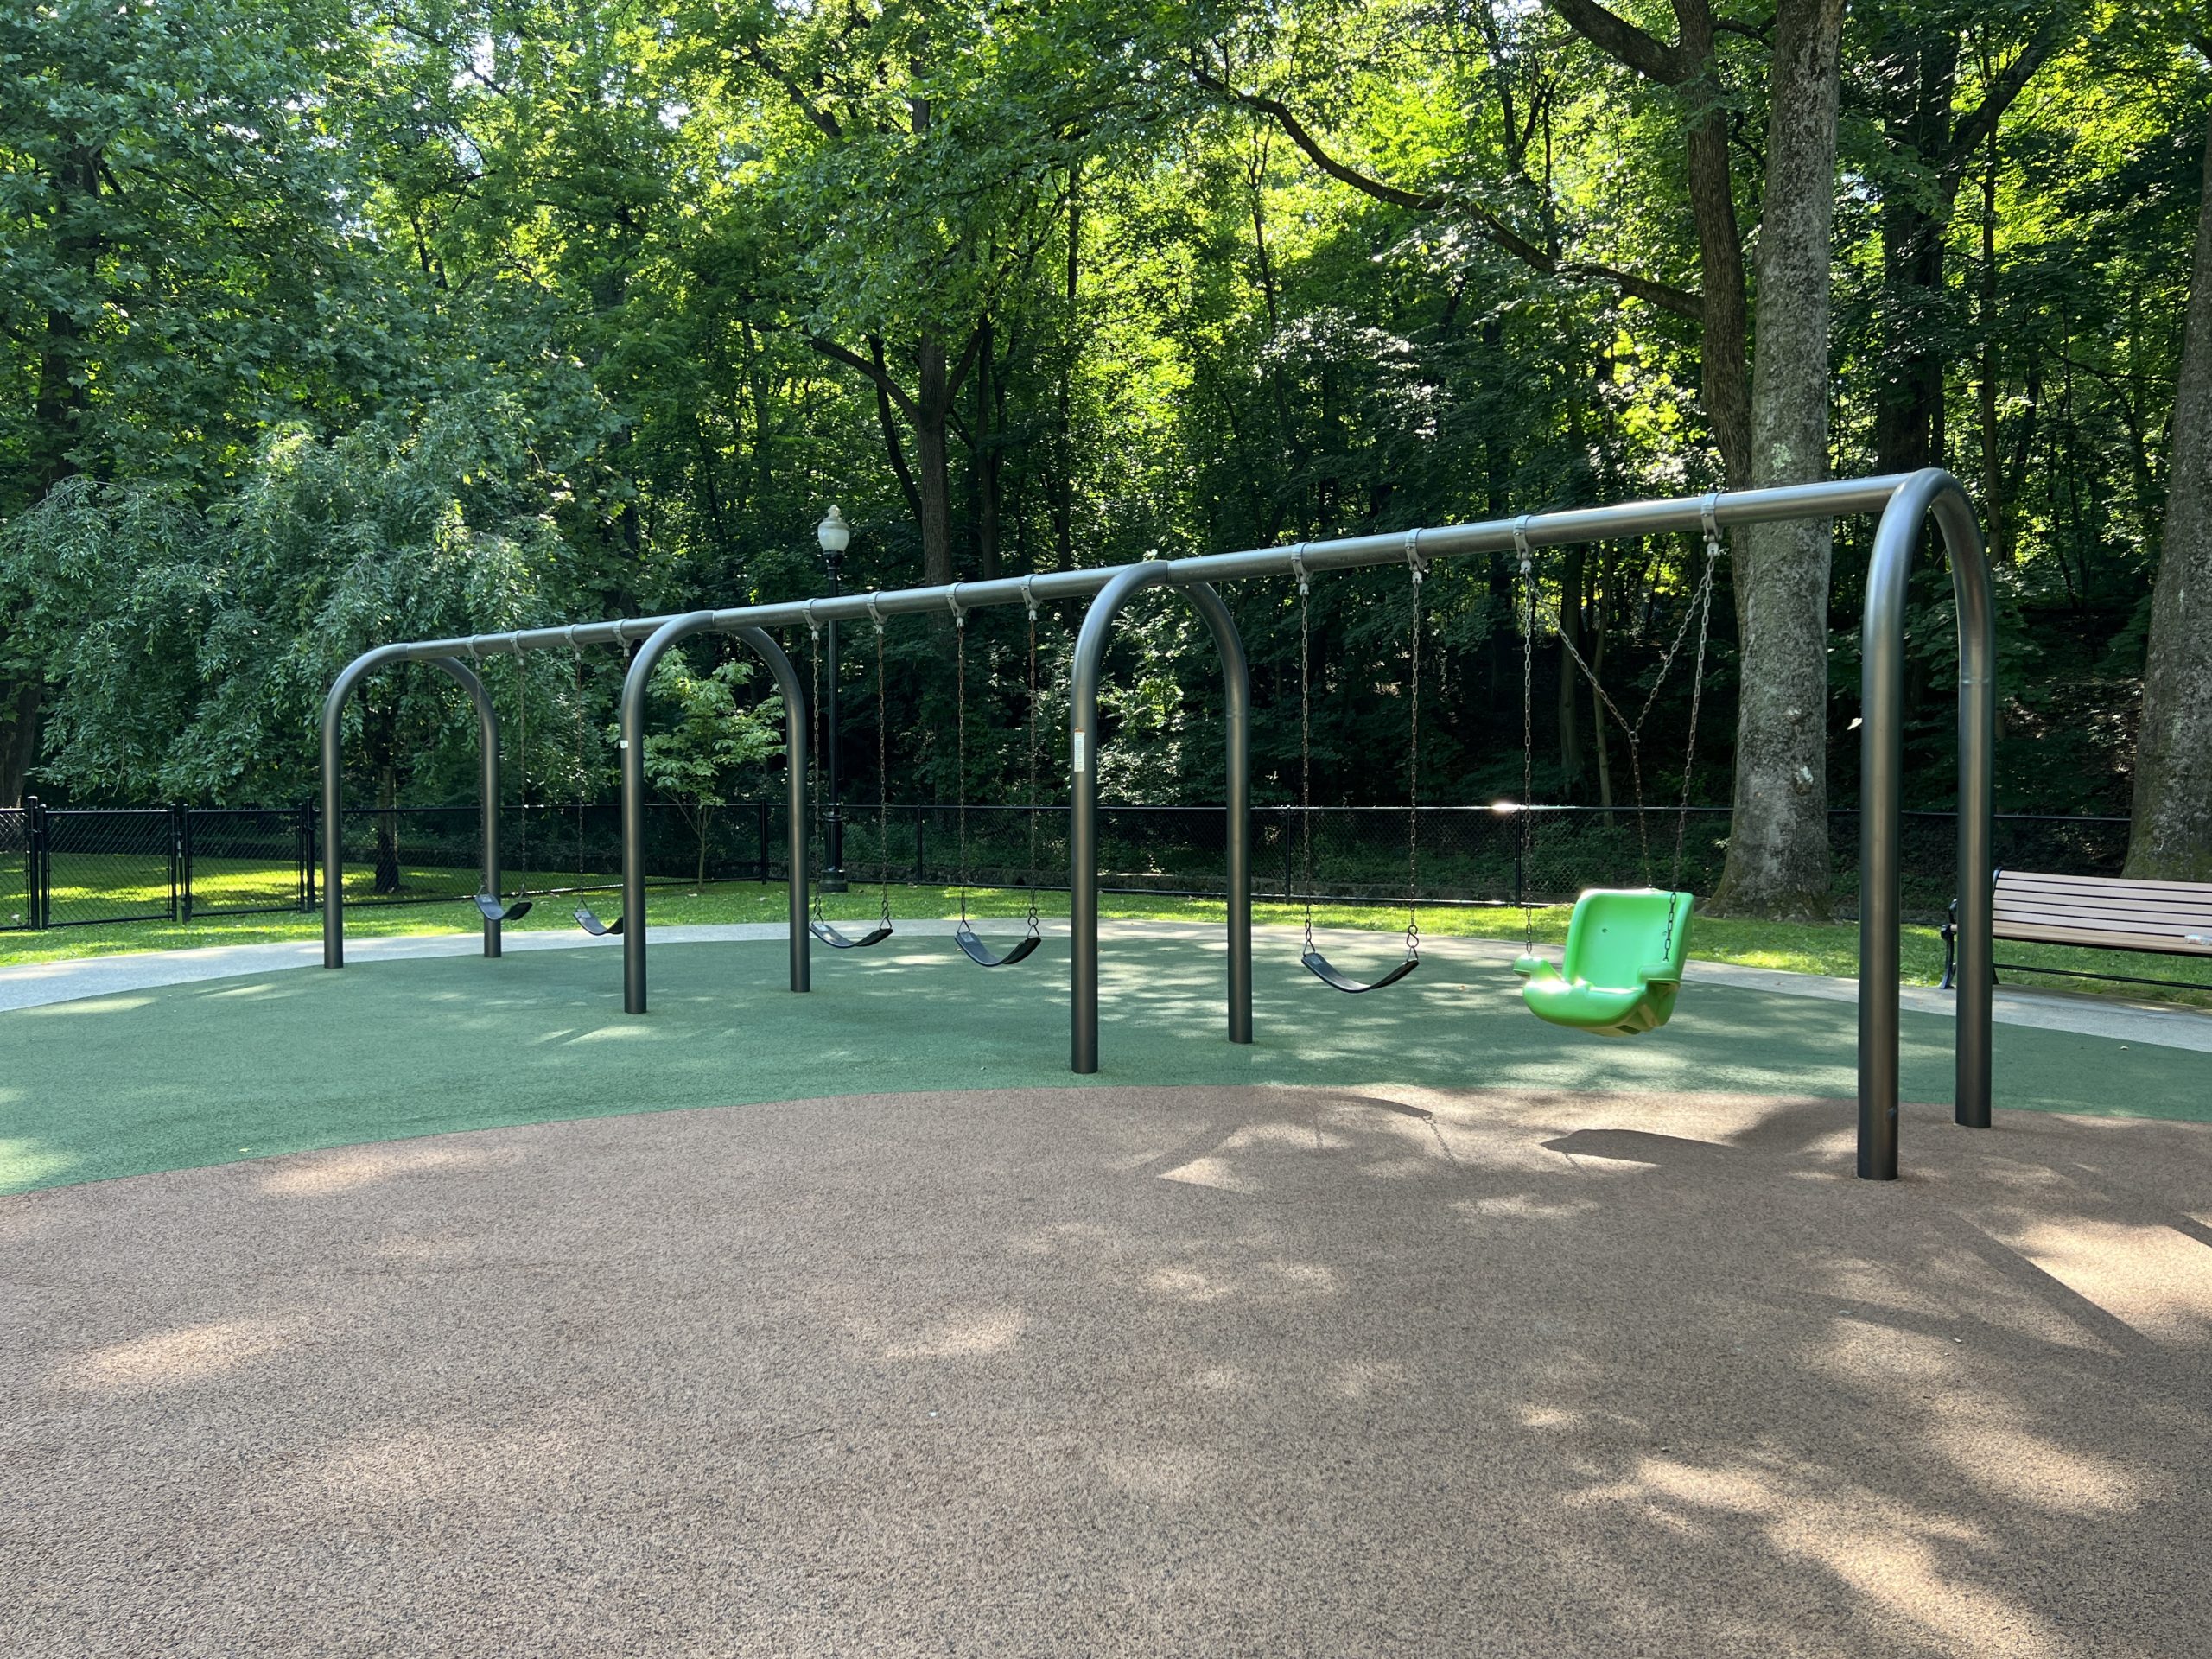 Grover Cleveland Playgrounds in Caldwell NJ - SWINGS - Traditional and bucket swing